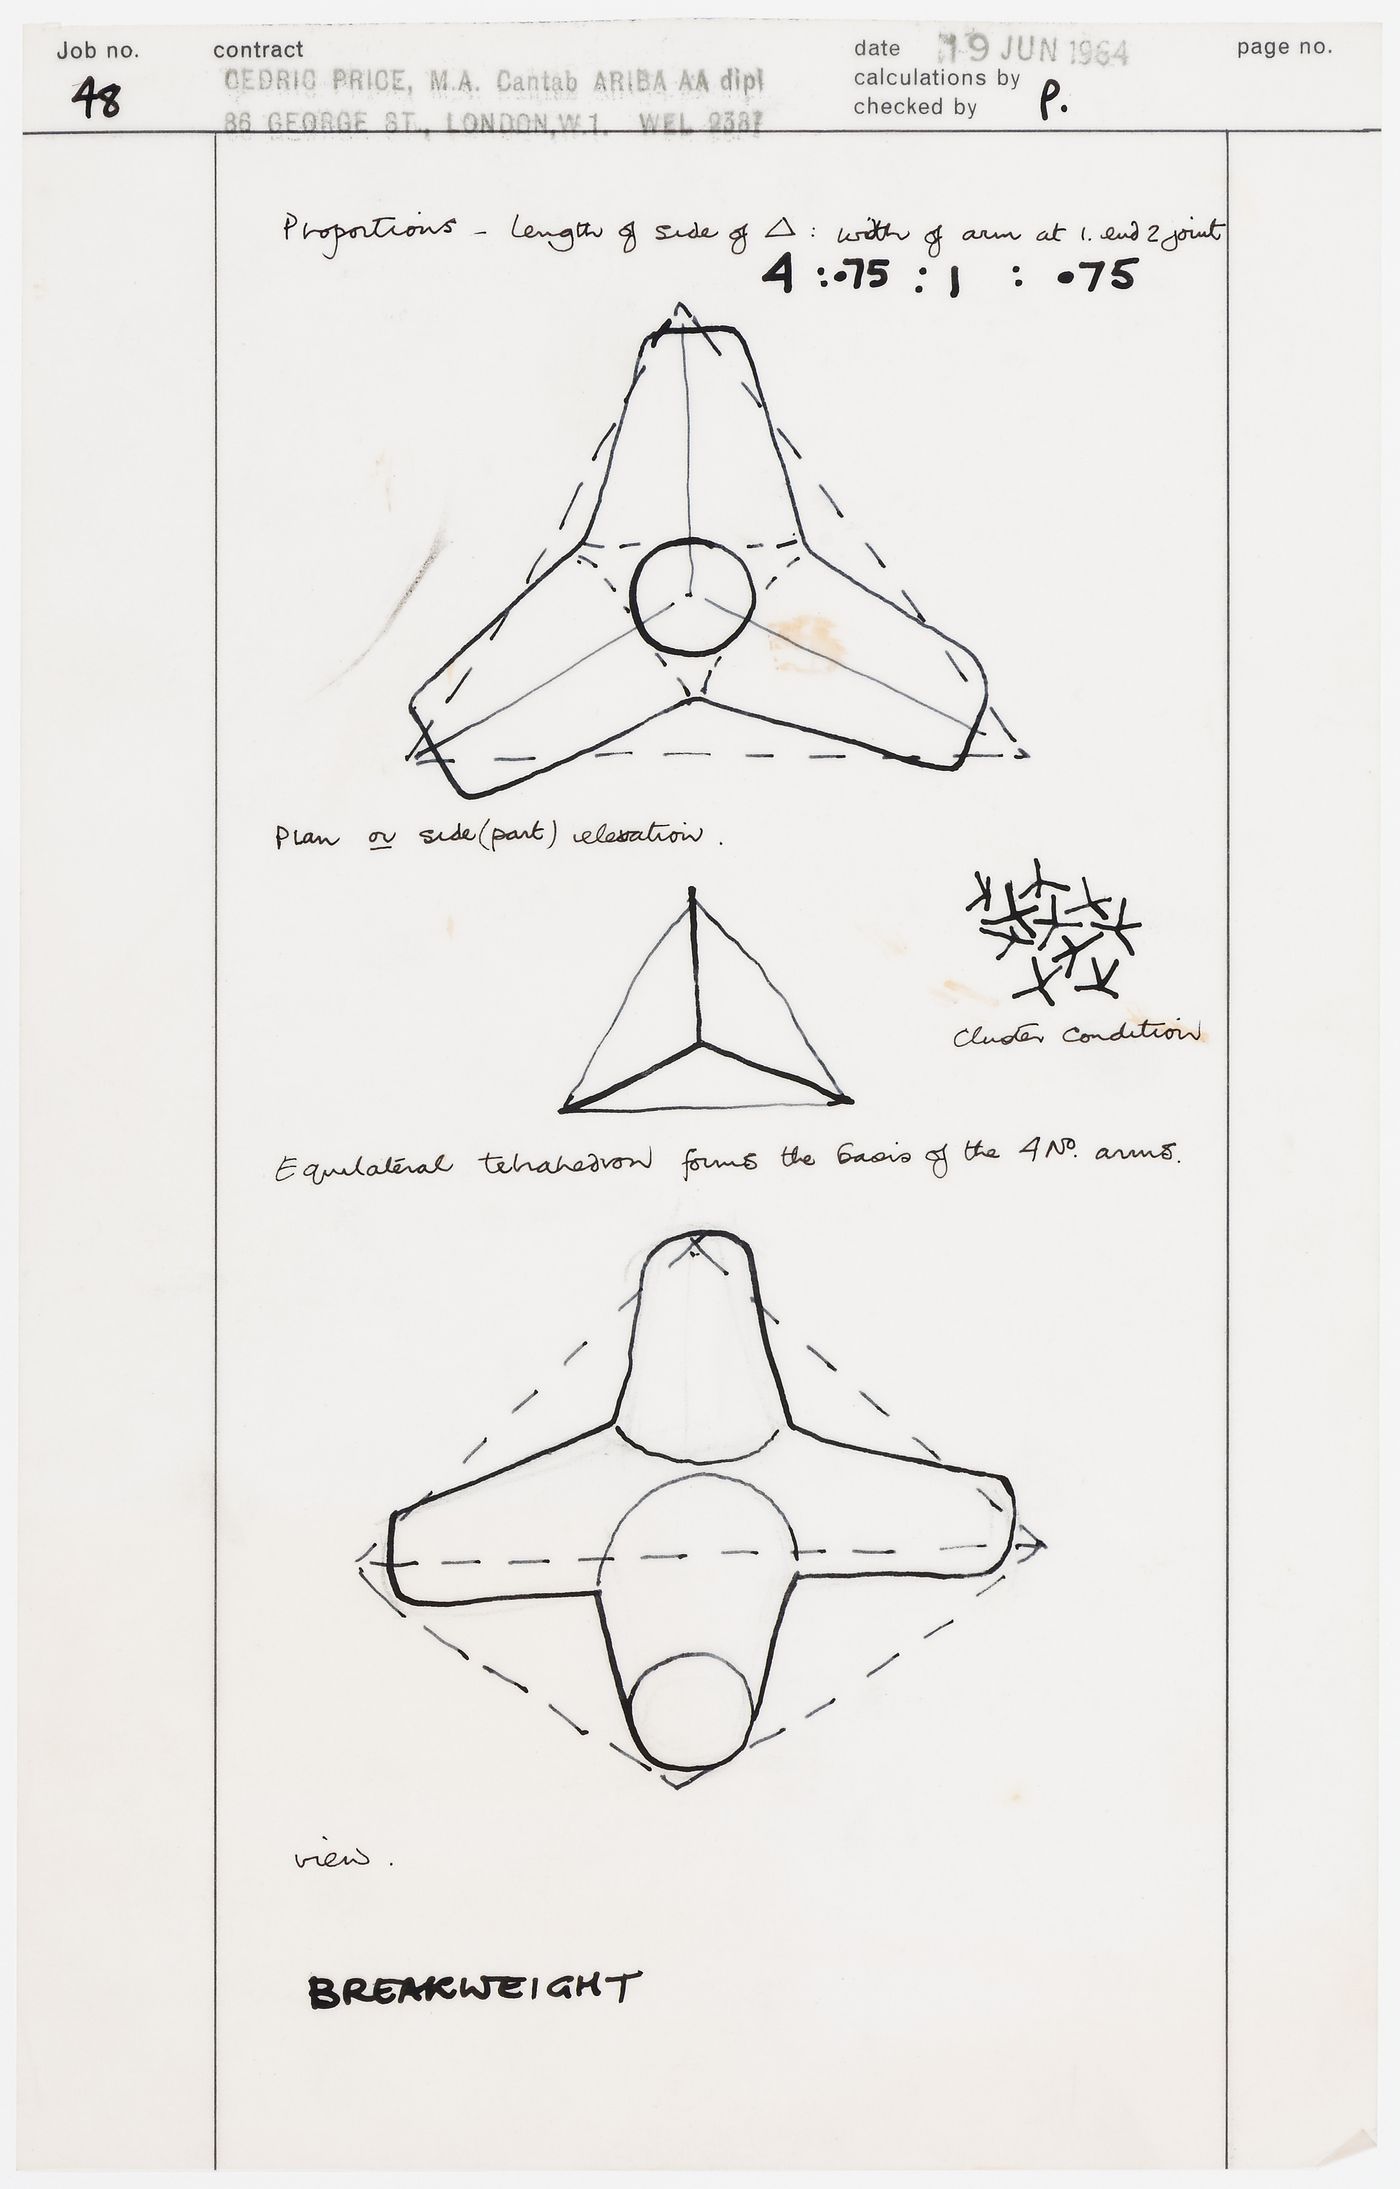 Plan (or side elevation) and view of "Breakweight"